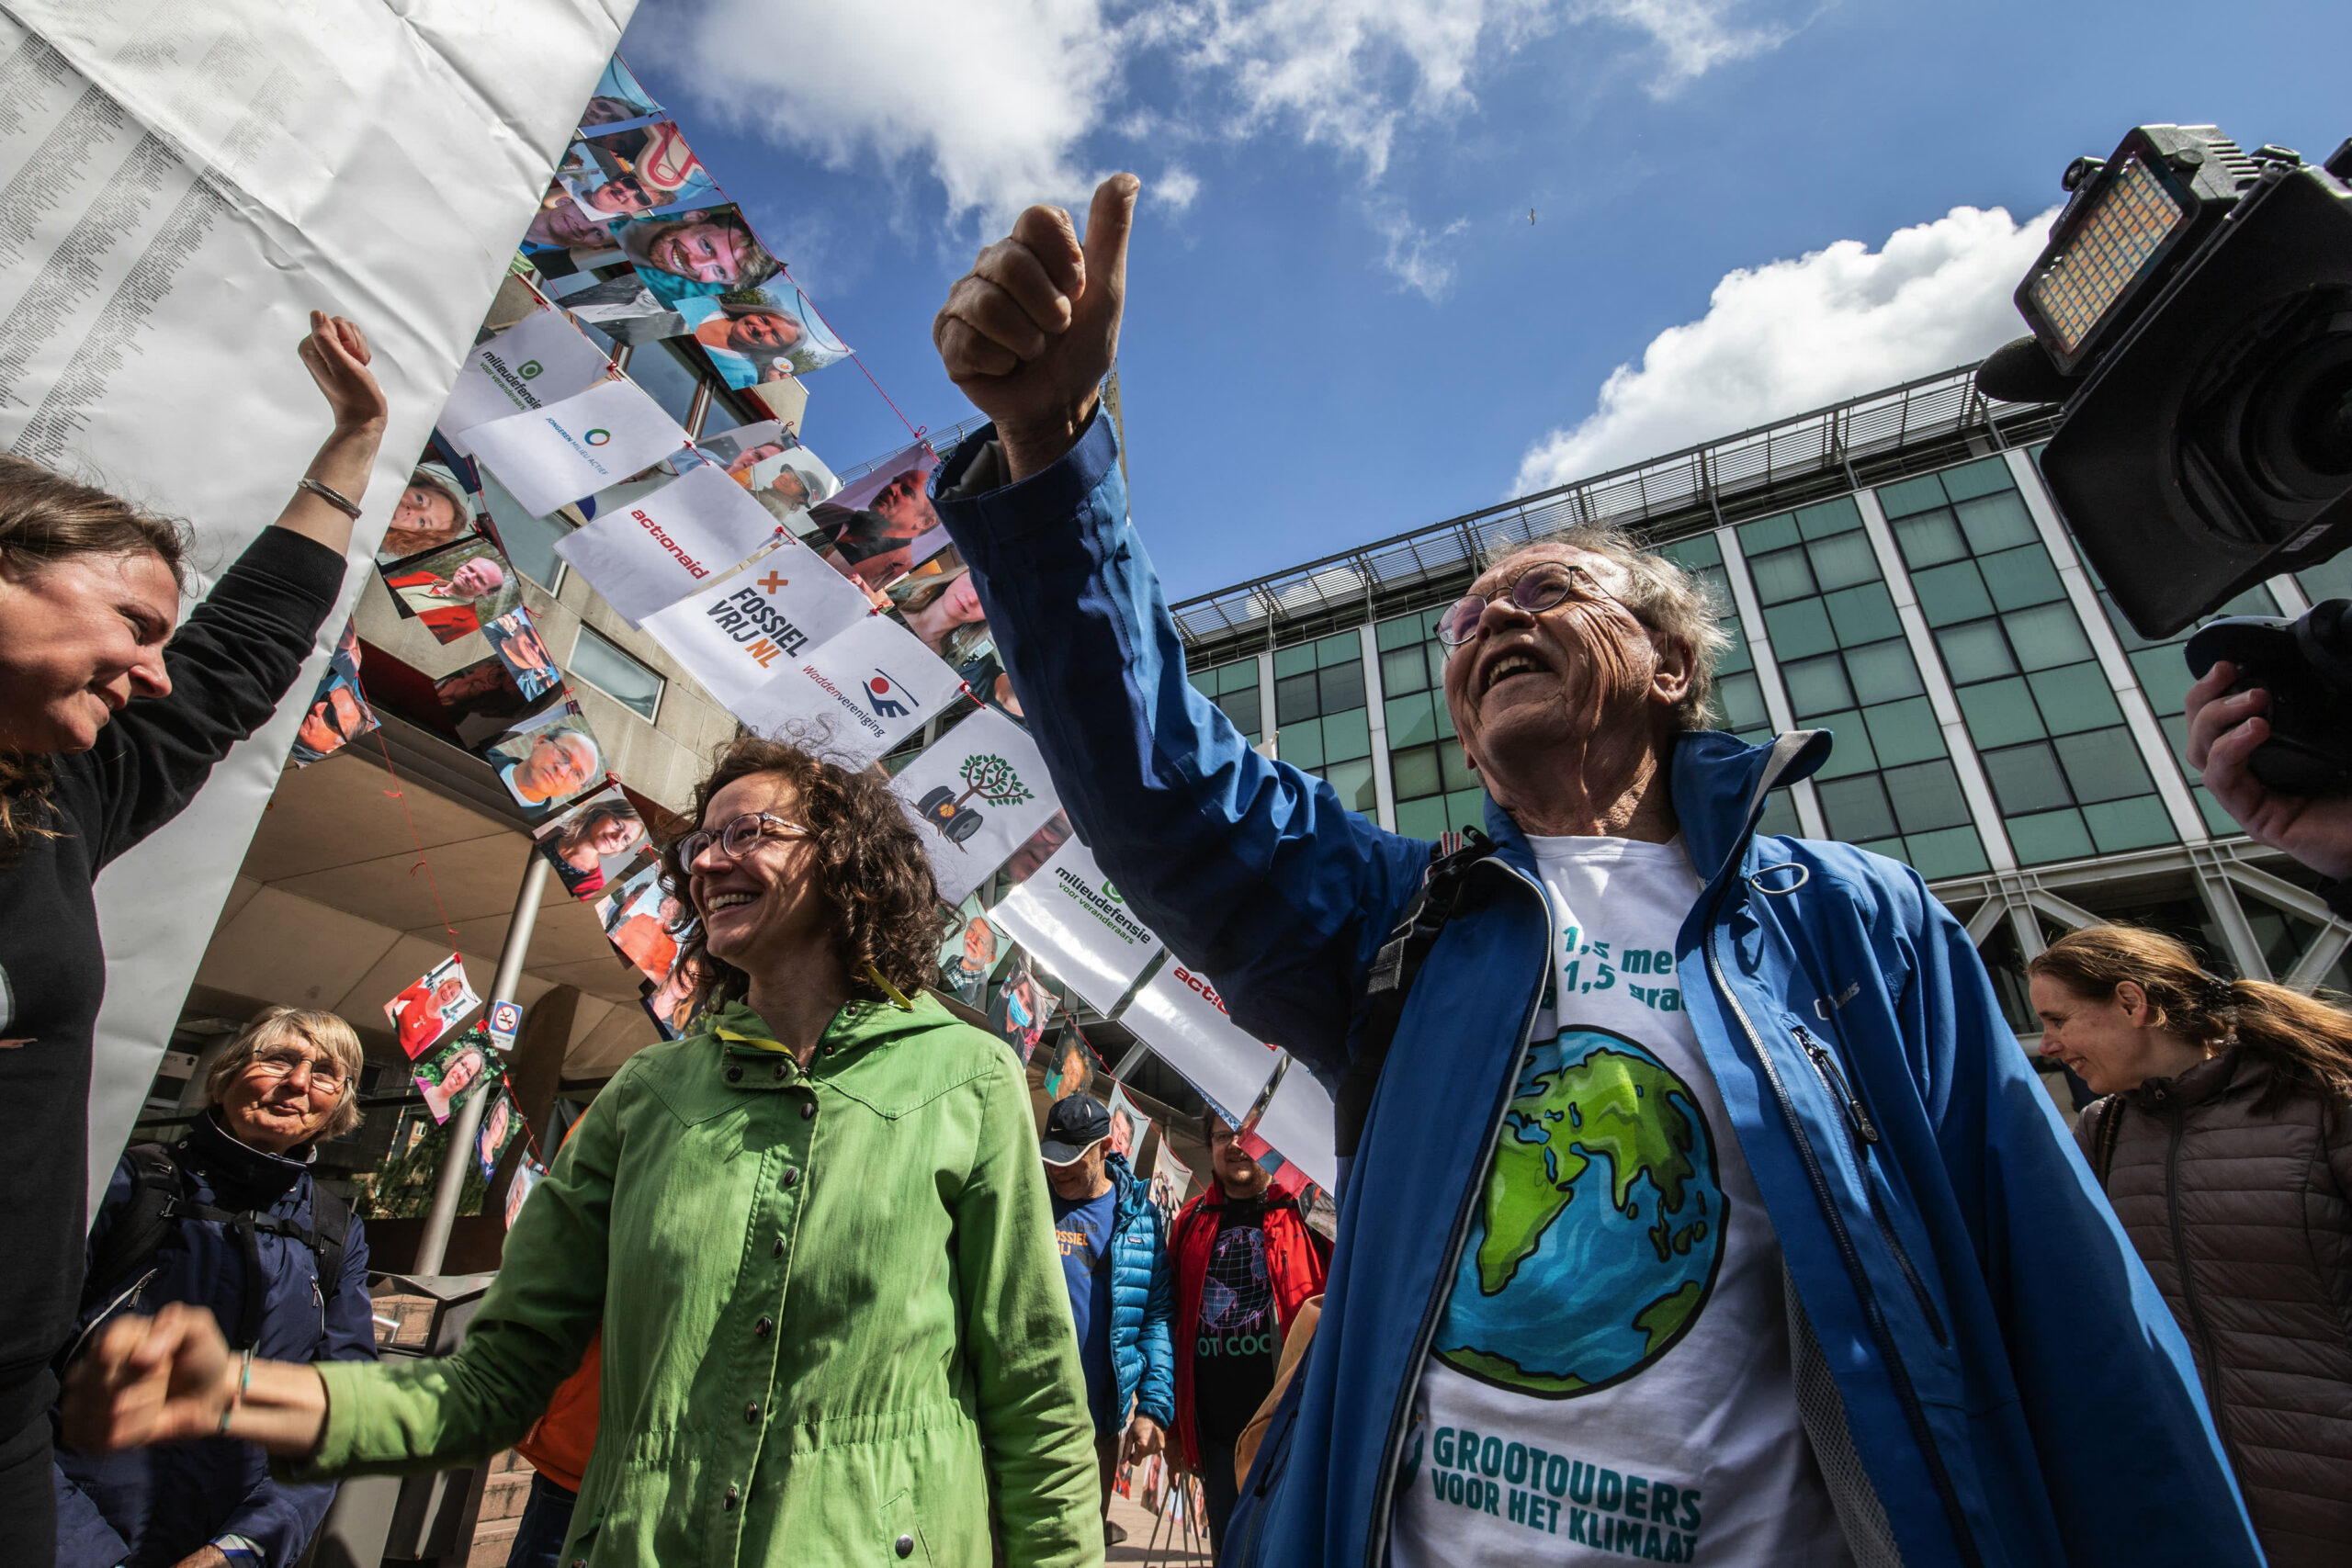 Climate campaigners to target banks after Shell court ruling